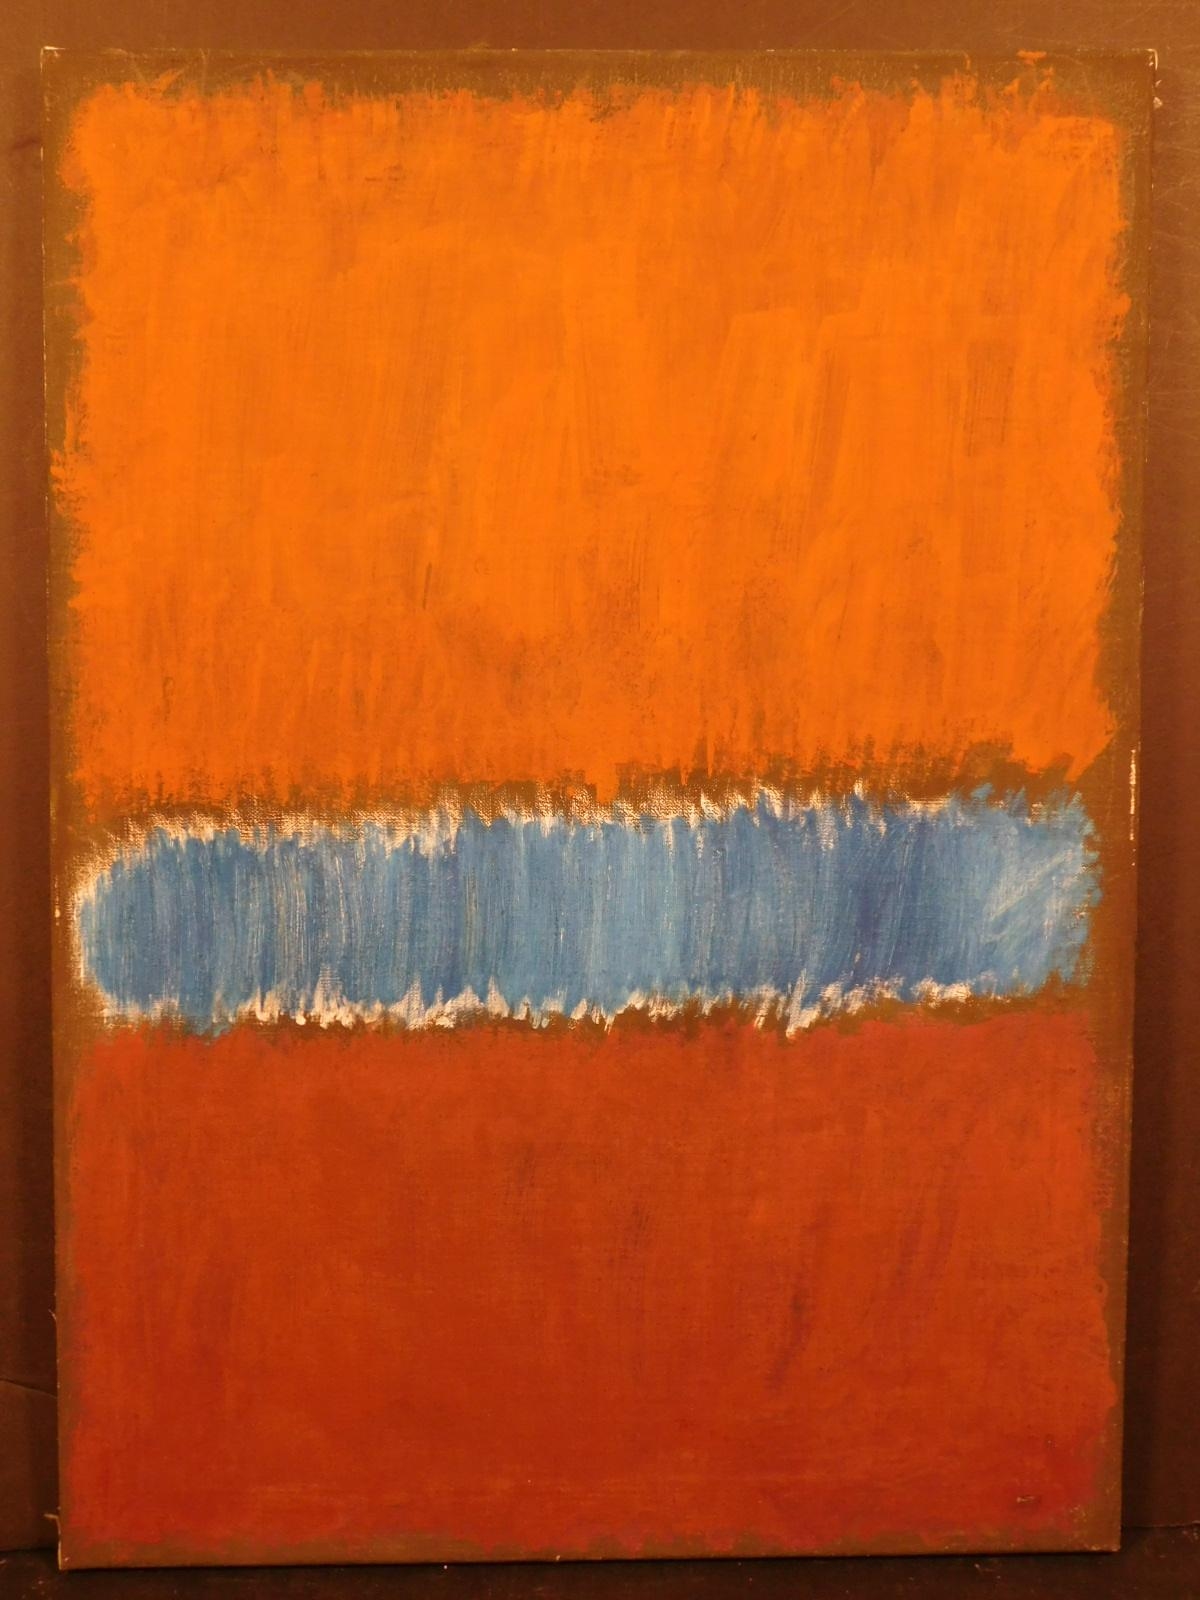 Artwork by Mark Rothko, Color Field Painting, Made of Oil on Canvas